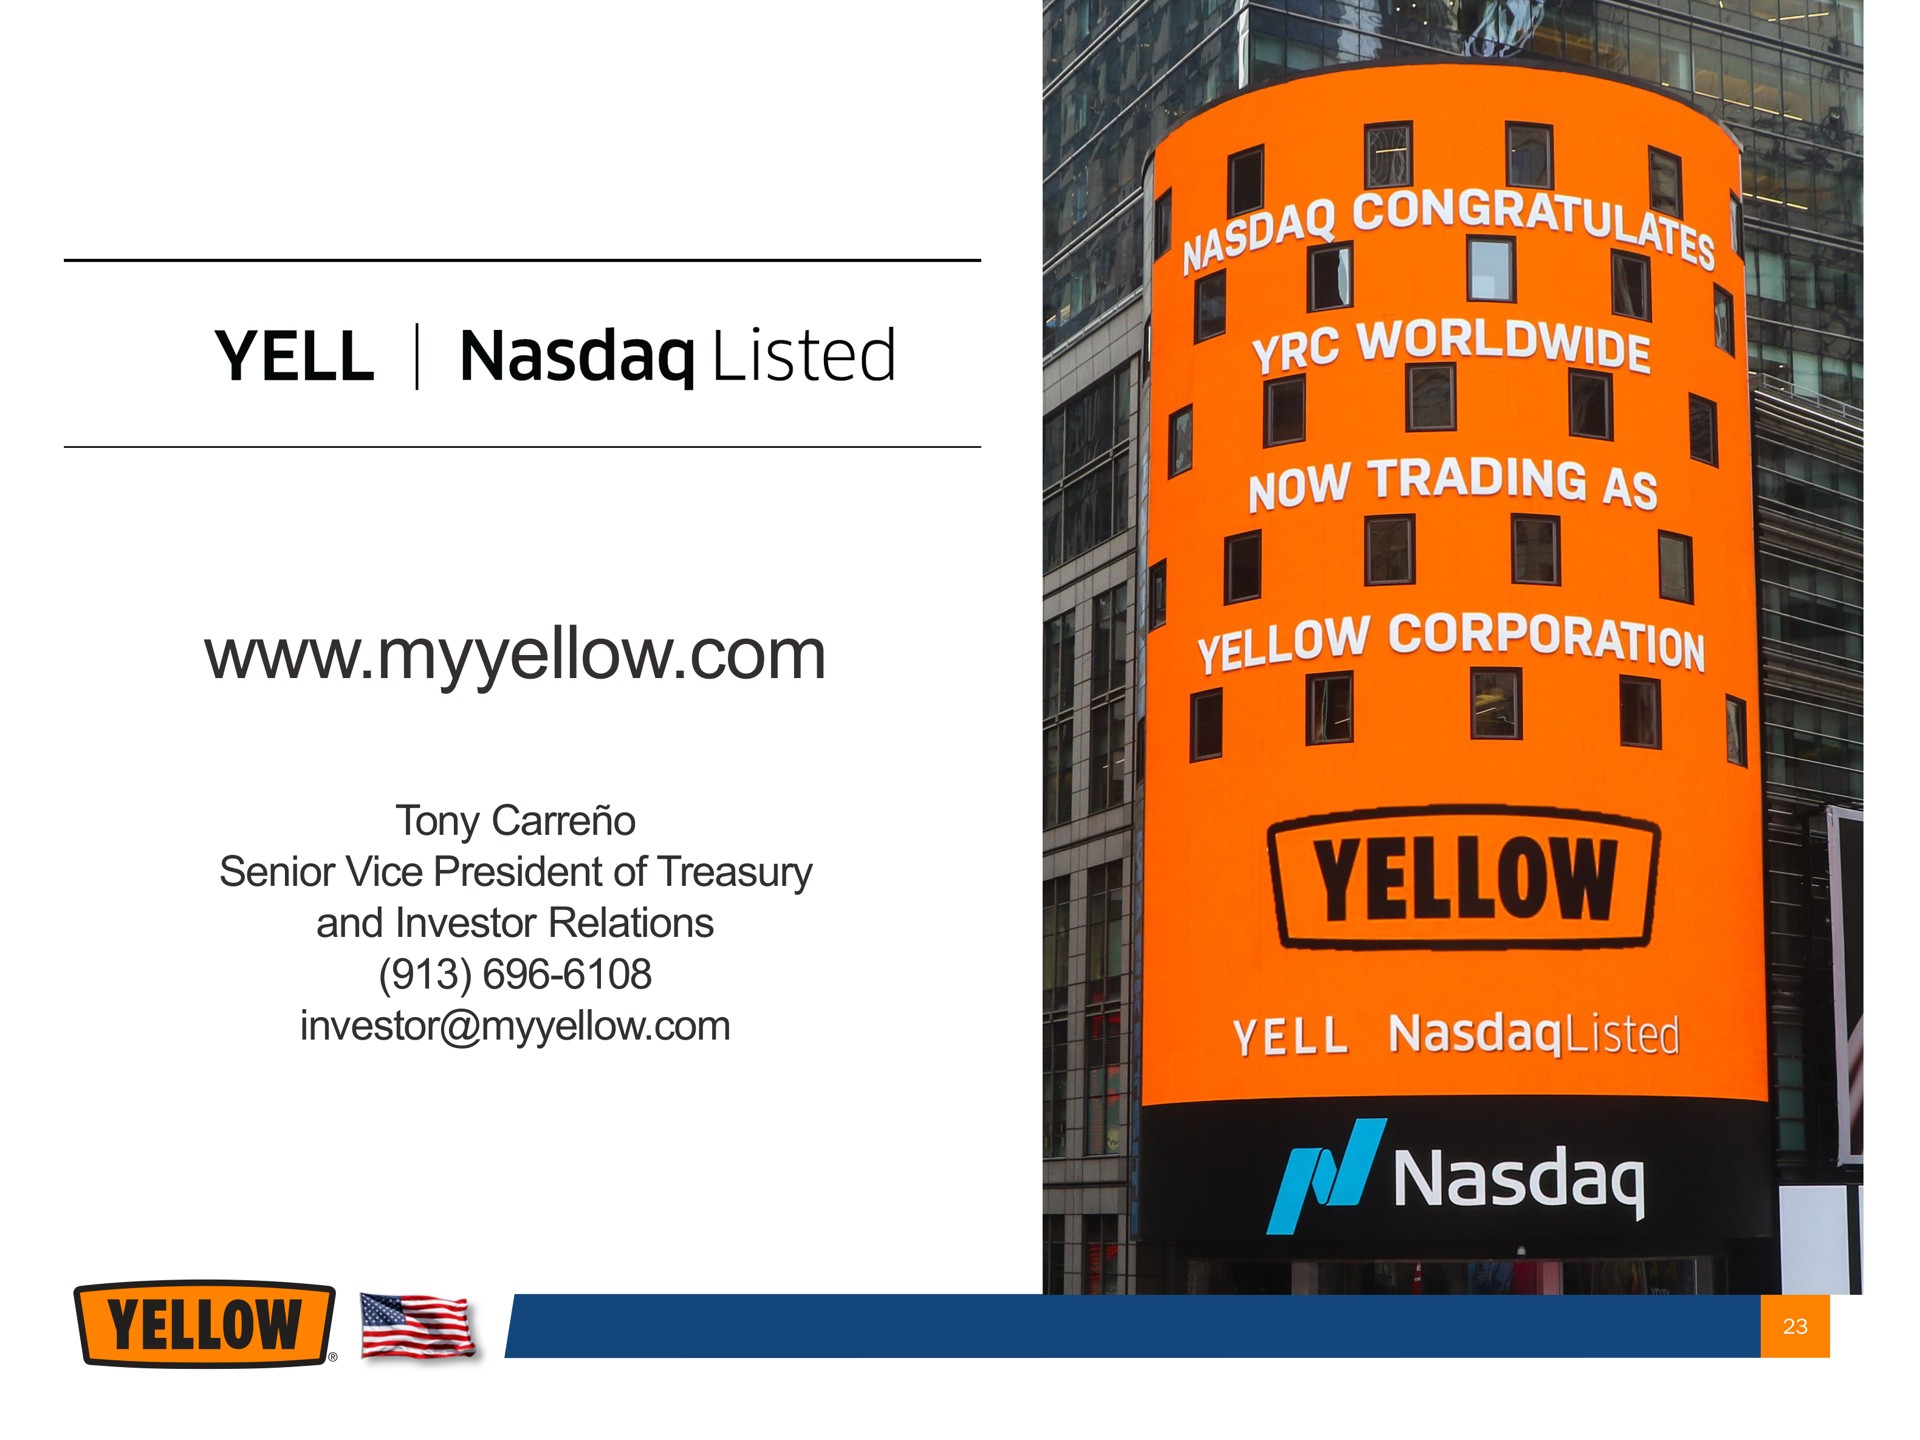 vell listed investor yellow now trading as vell | Yellow Corporation